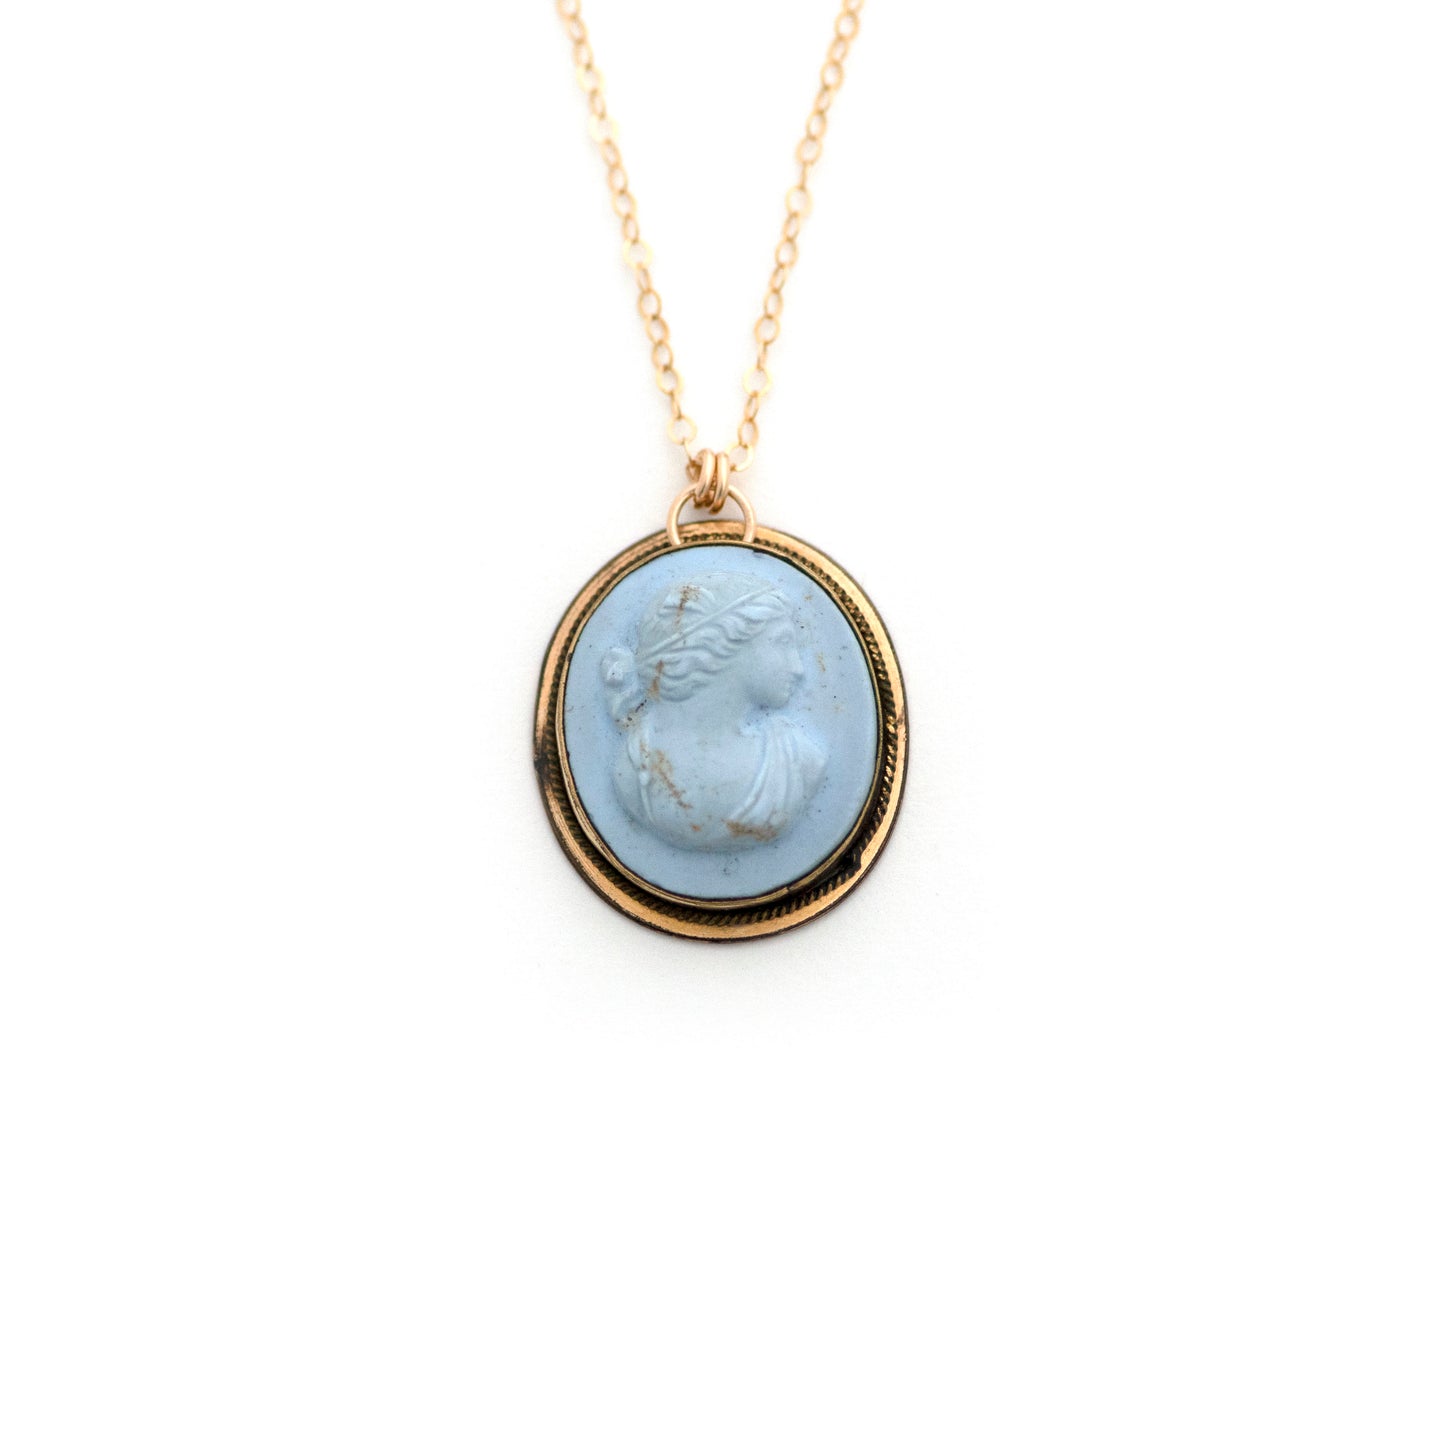 This antique conversion necklace is made up of:  Gold filled Victorian cuff link from the late 1800s with a pale blue porcelain cameo on a 14k gold filled chain.